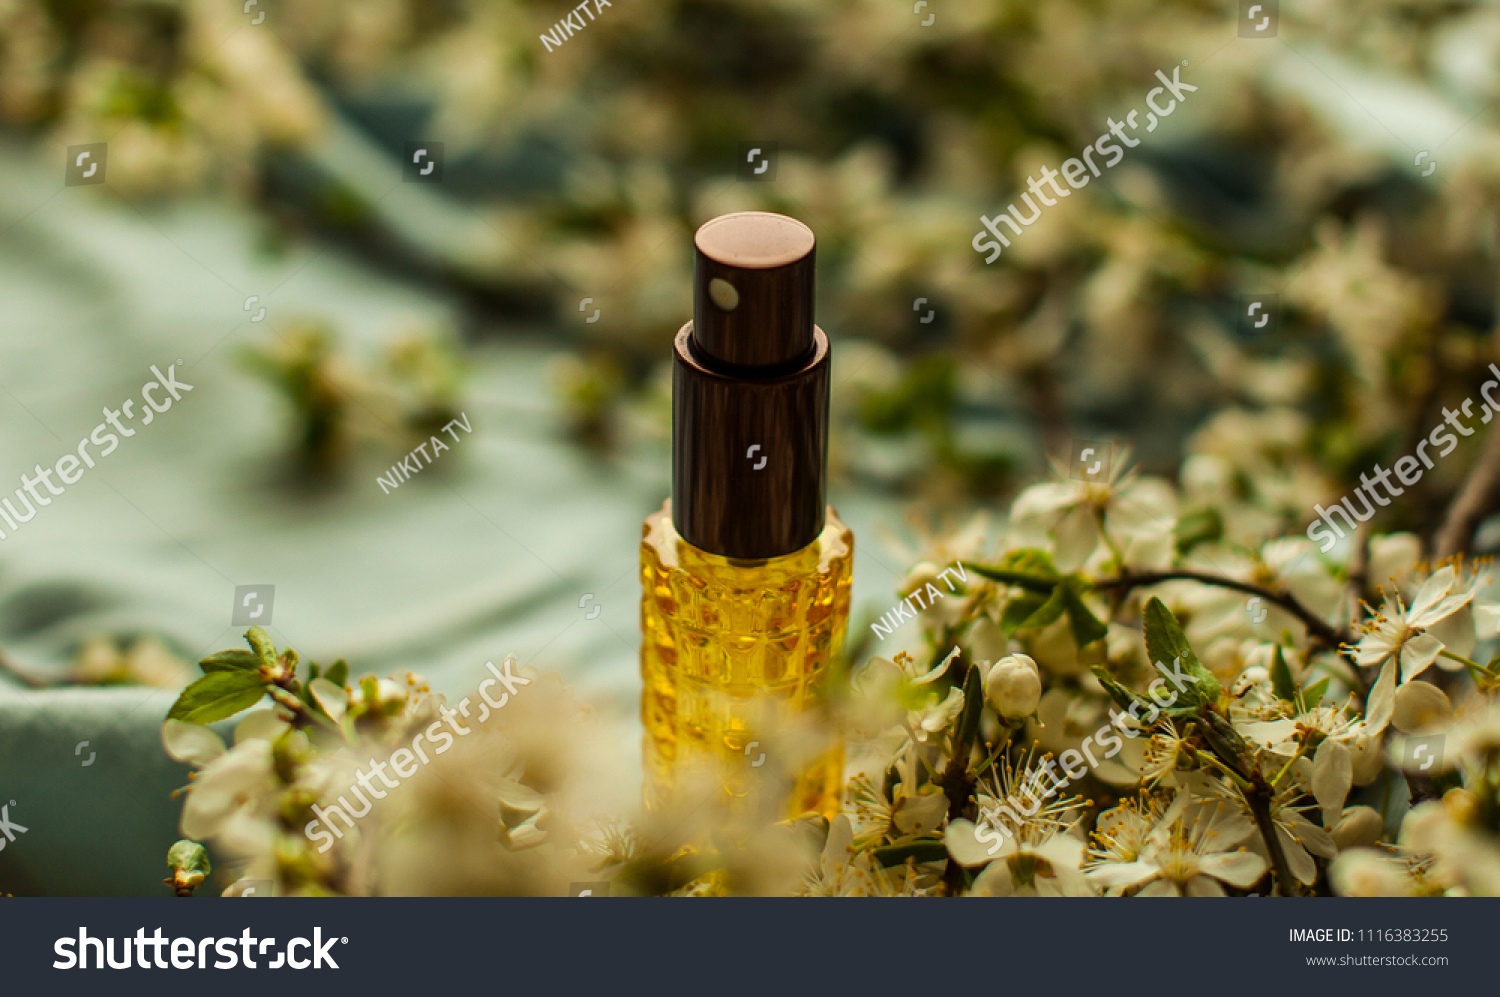 perfume and aromatic oils bottles surrounded by fresh flower
 #1116383255